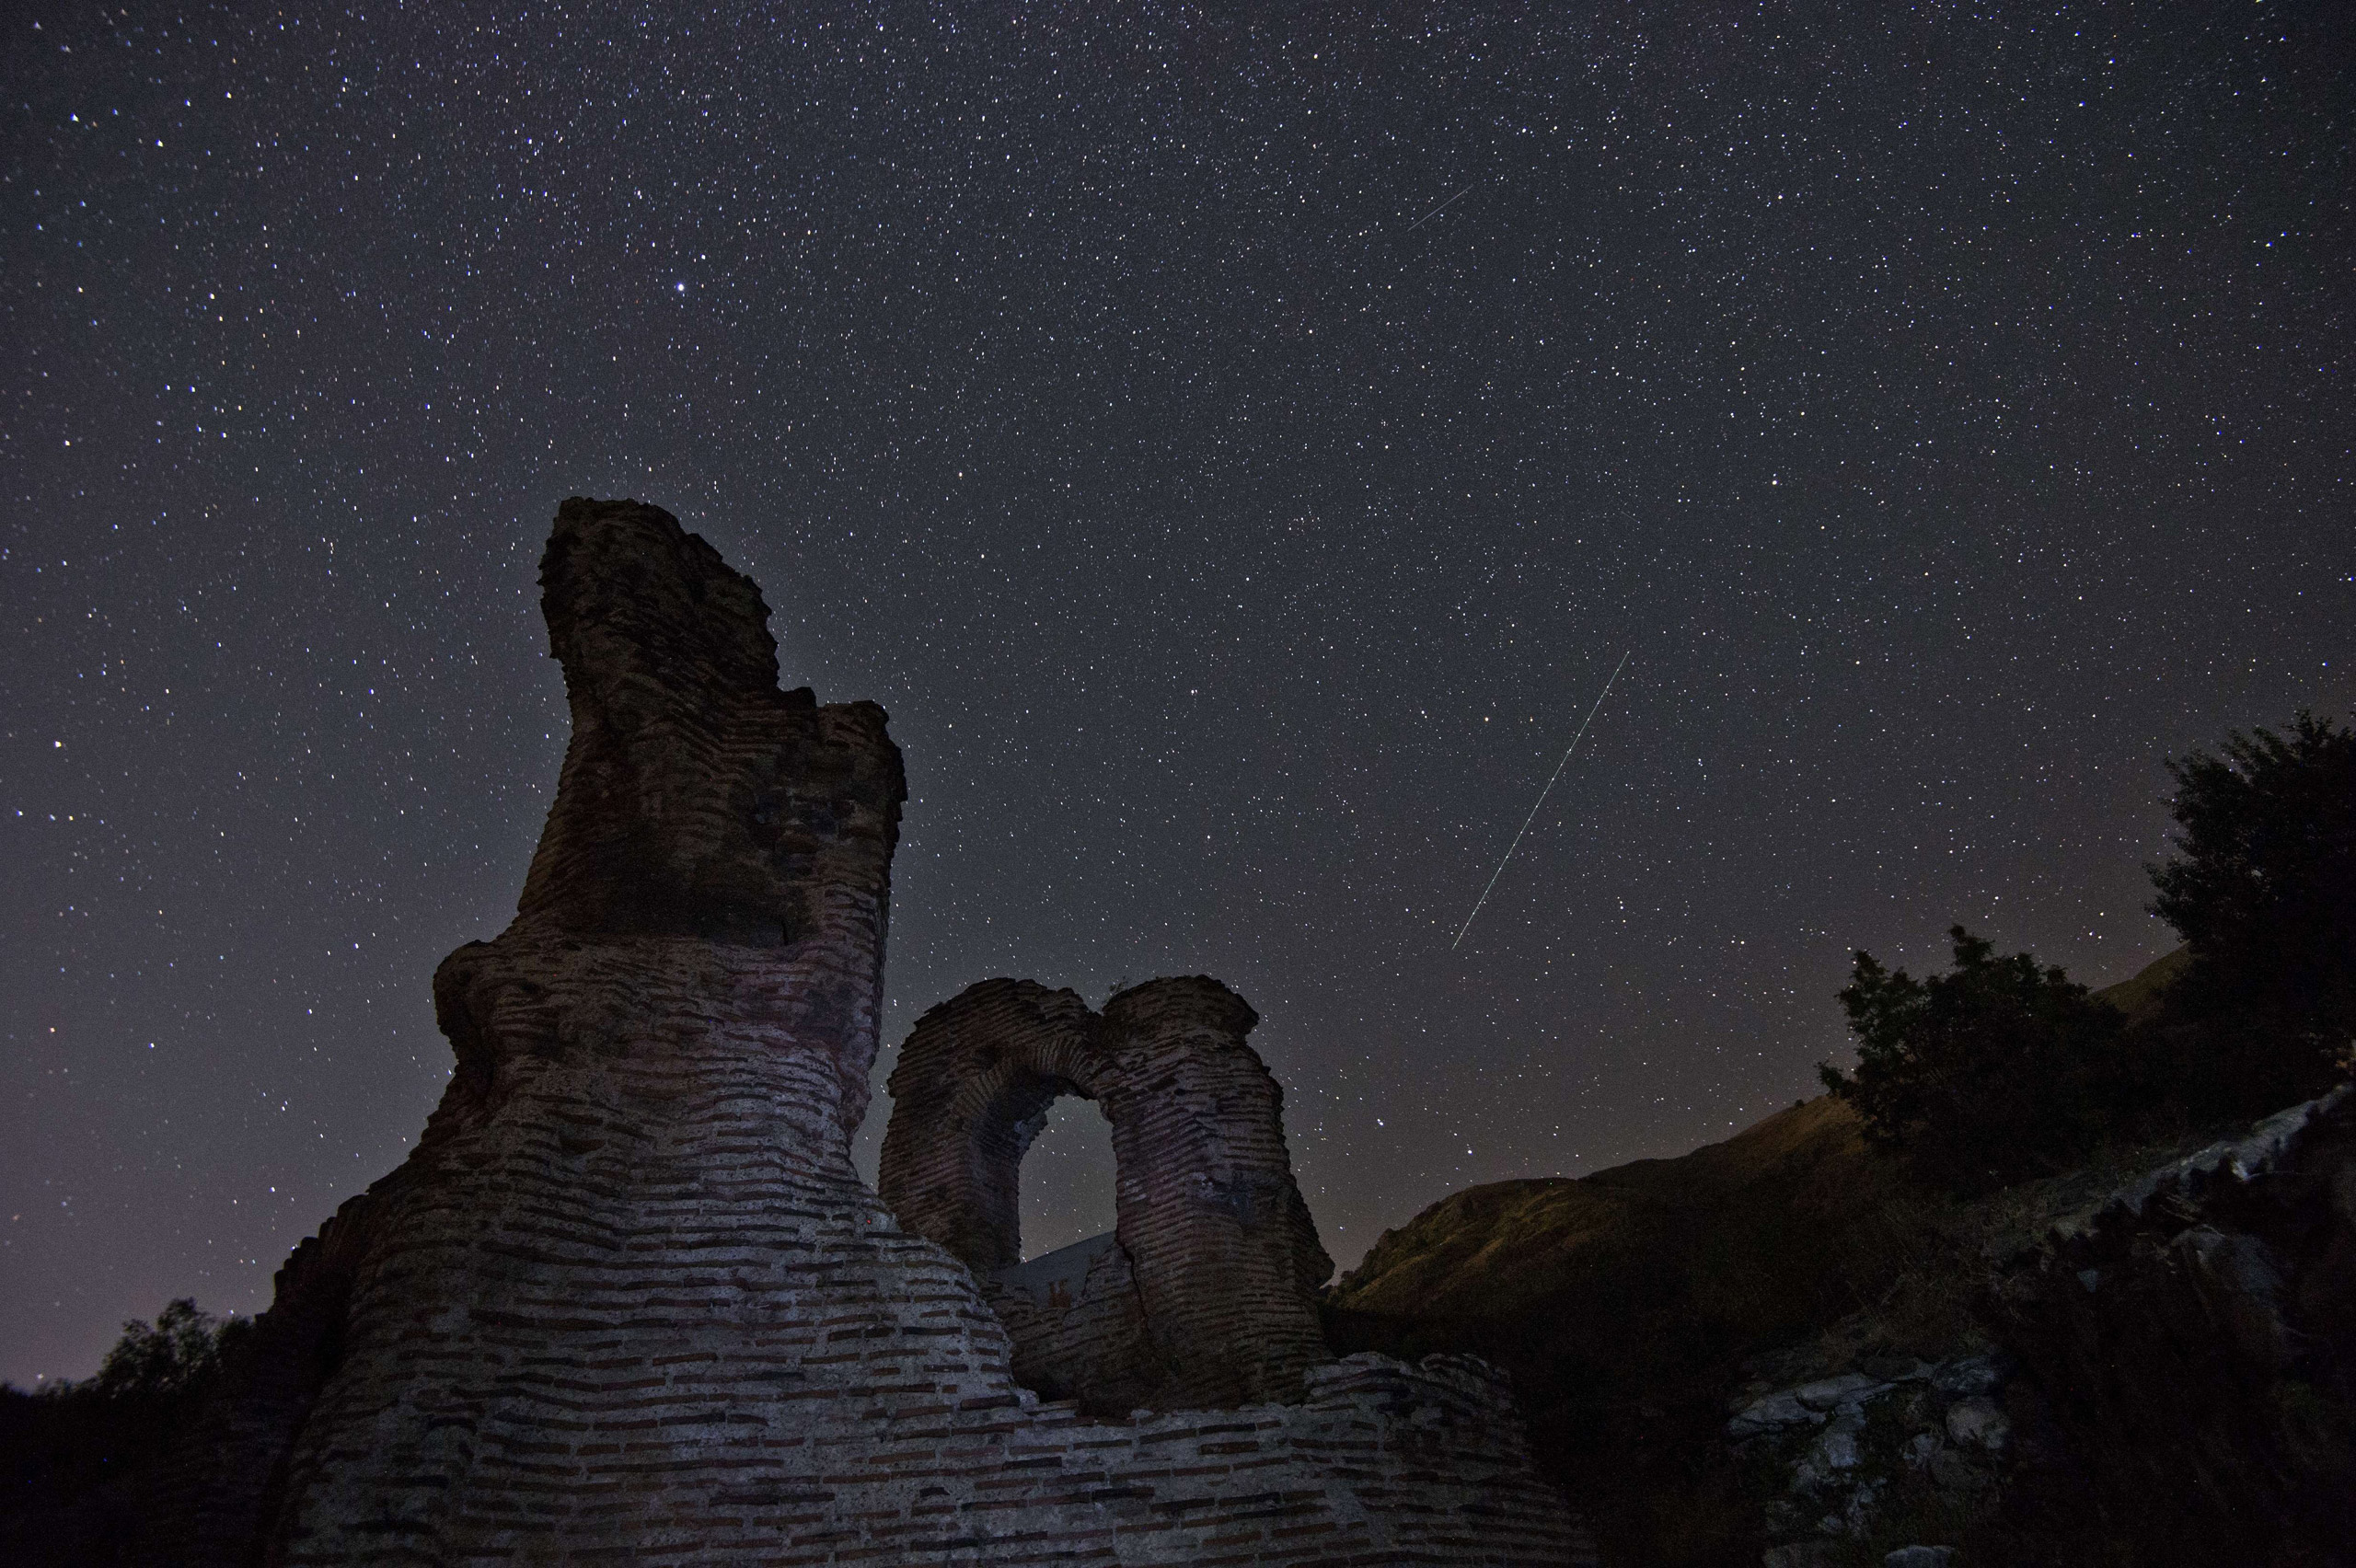 A long exposure image shows a Perseid meteor streak across the night sky over the remains of St. Ilia Roman Christian basilica near the town of Pirdop on Aug. 12, 2015.